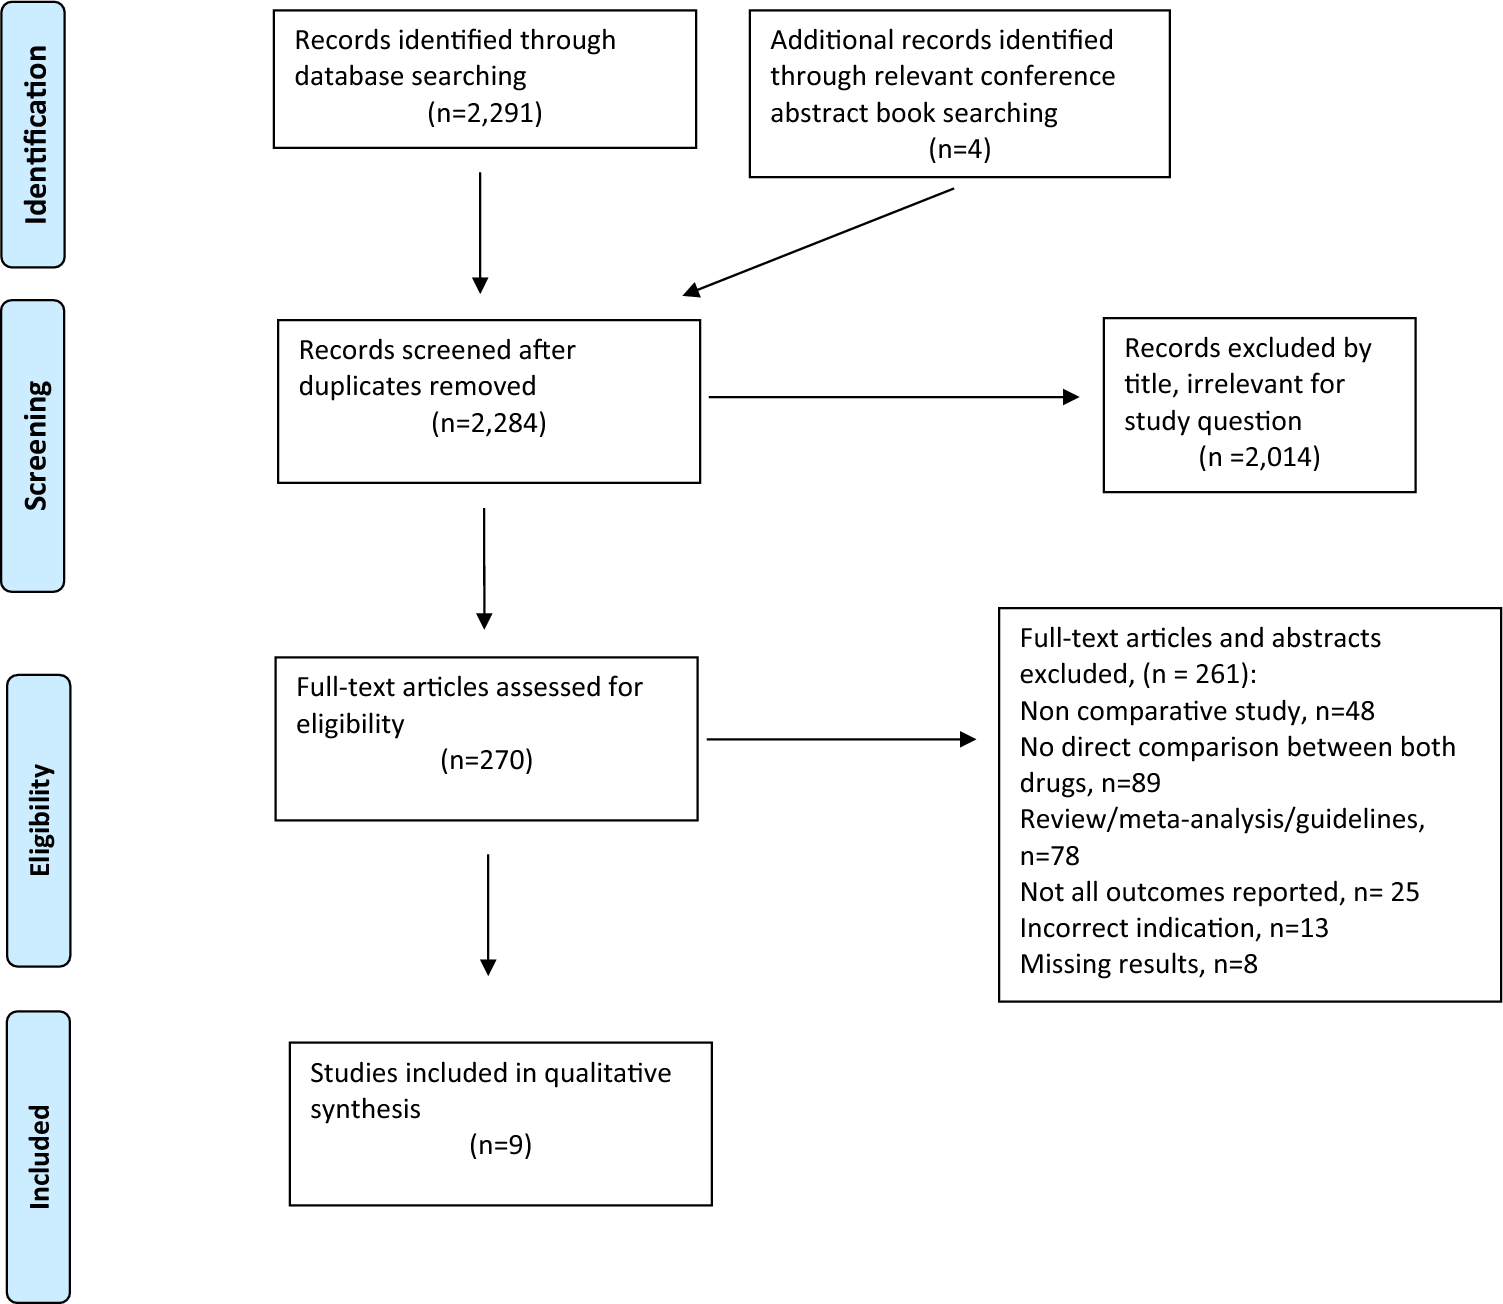 Efficacy and safety of rivaroxaban versus apixaban for venous thromboembolism: A systematic review and meta-analysis of observational studies